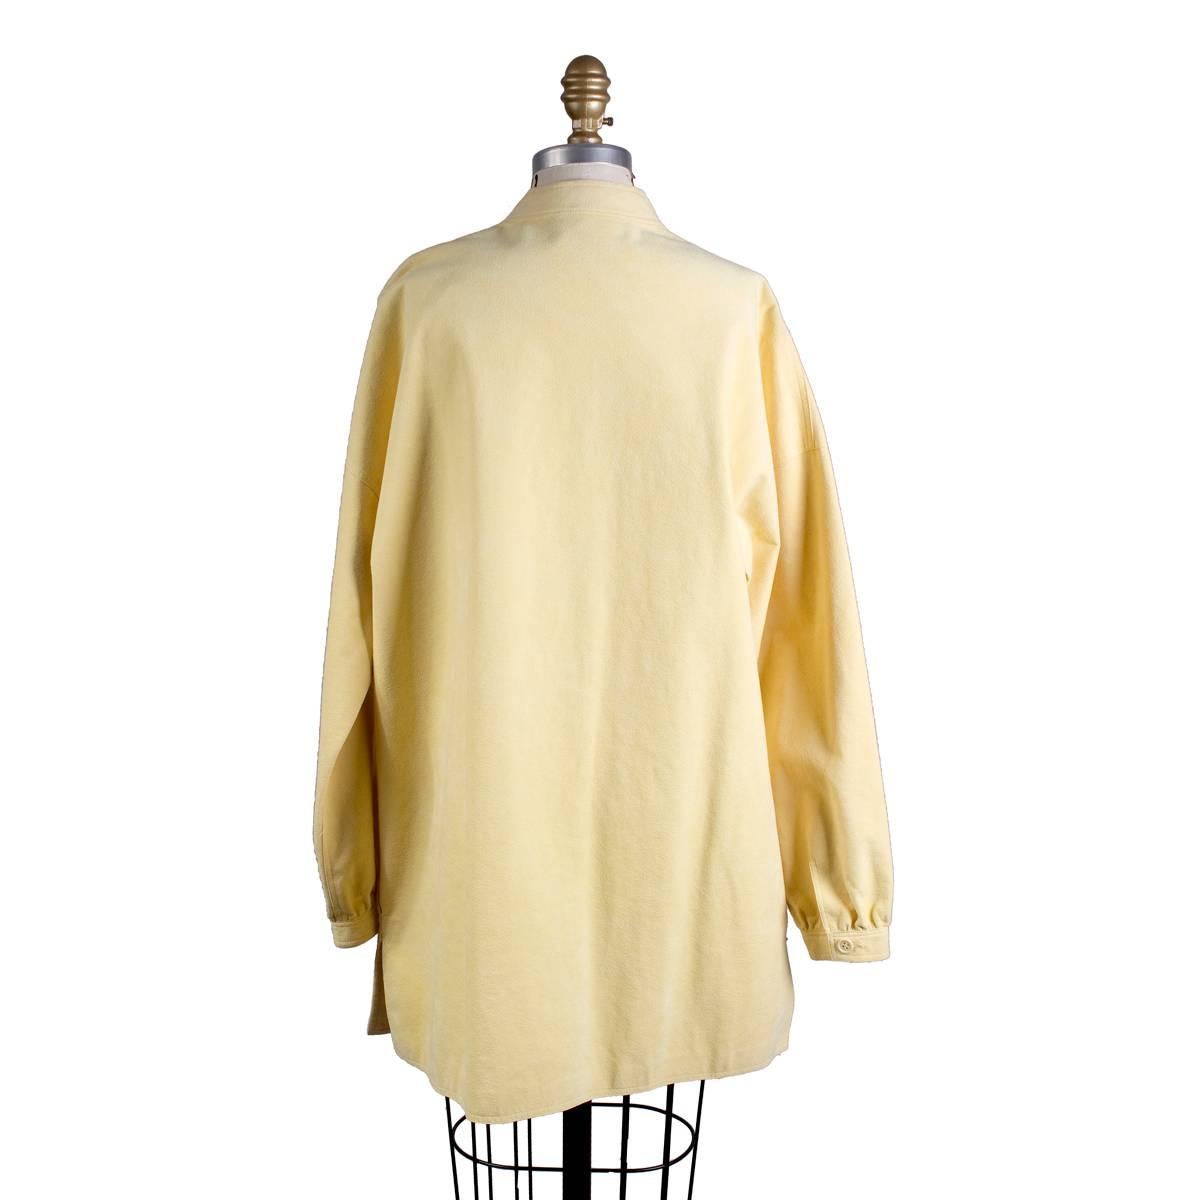 Vintage jacket by Halston circa 1970s
Part of Halston's ultrasuede series
Lightweight suede in light yellow color
Mandarin collar
Front buttons closure
Condition: Excellent vintage condition
Size/Measurements:
26